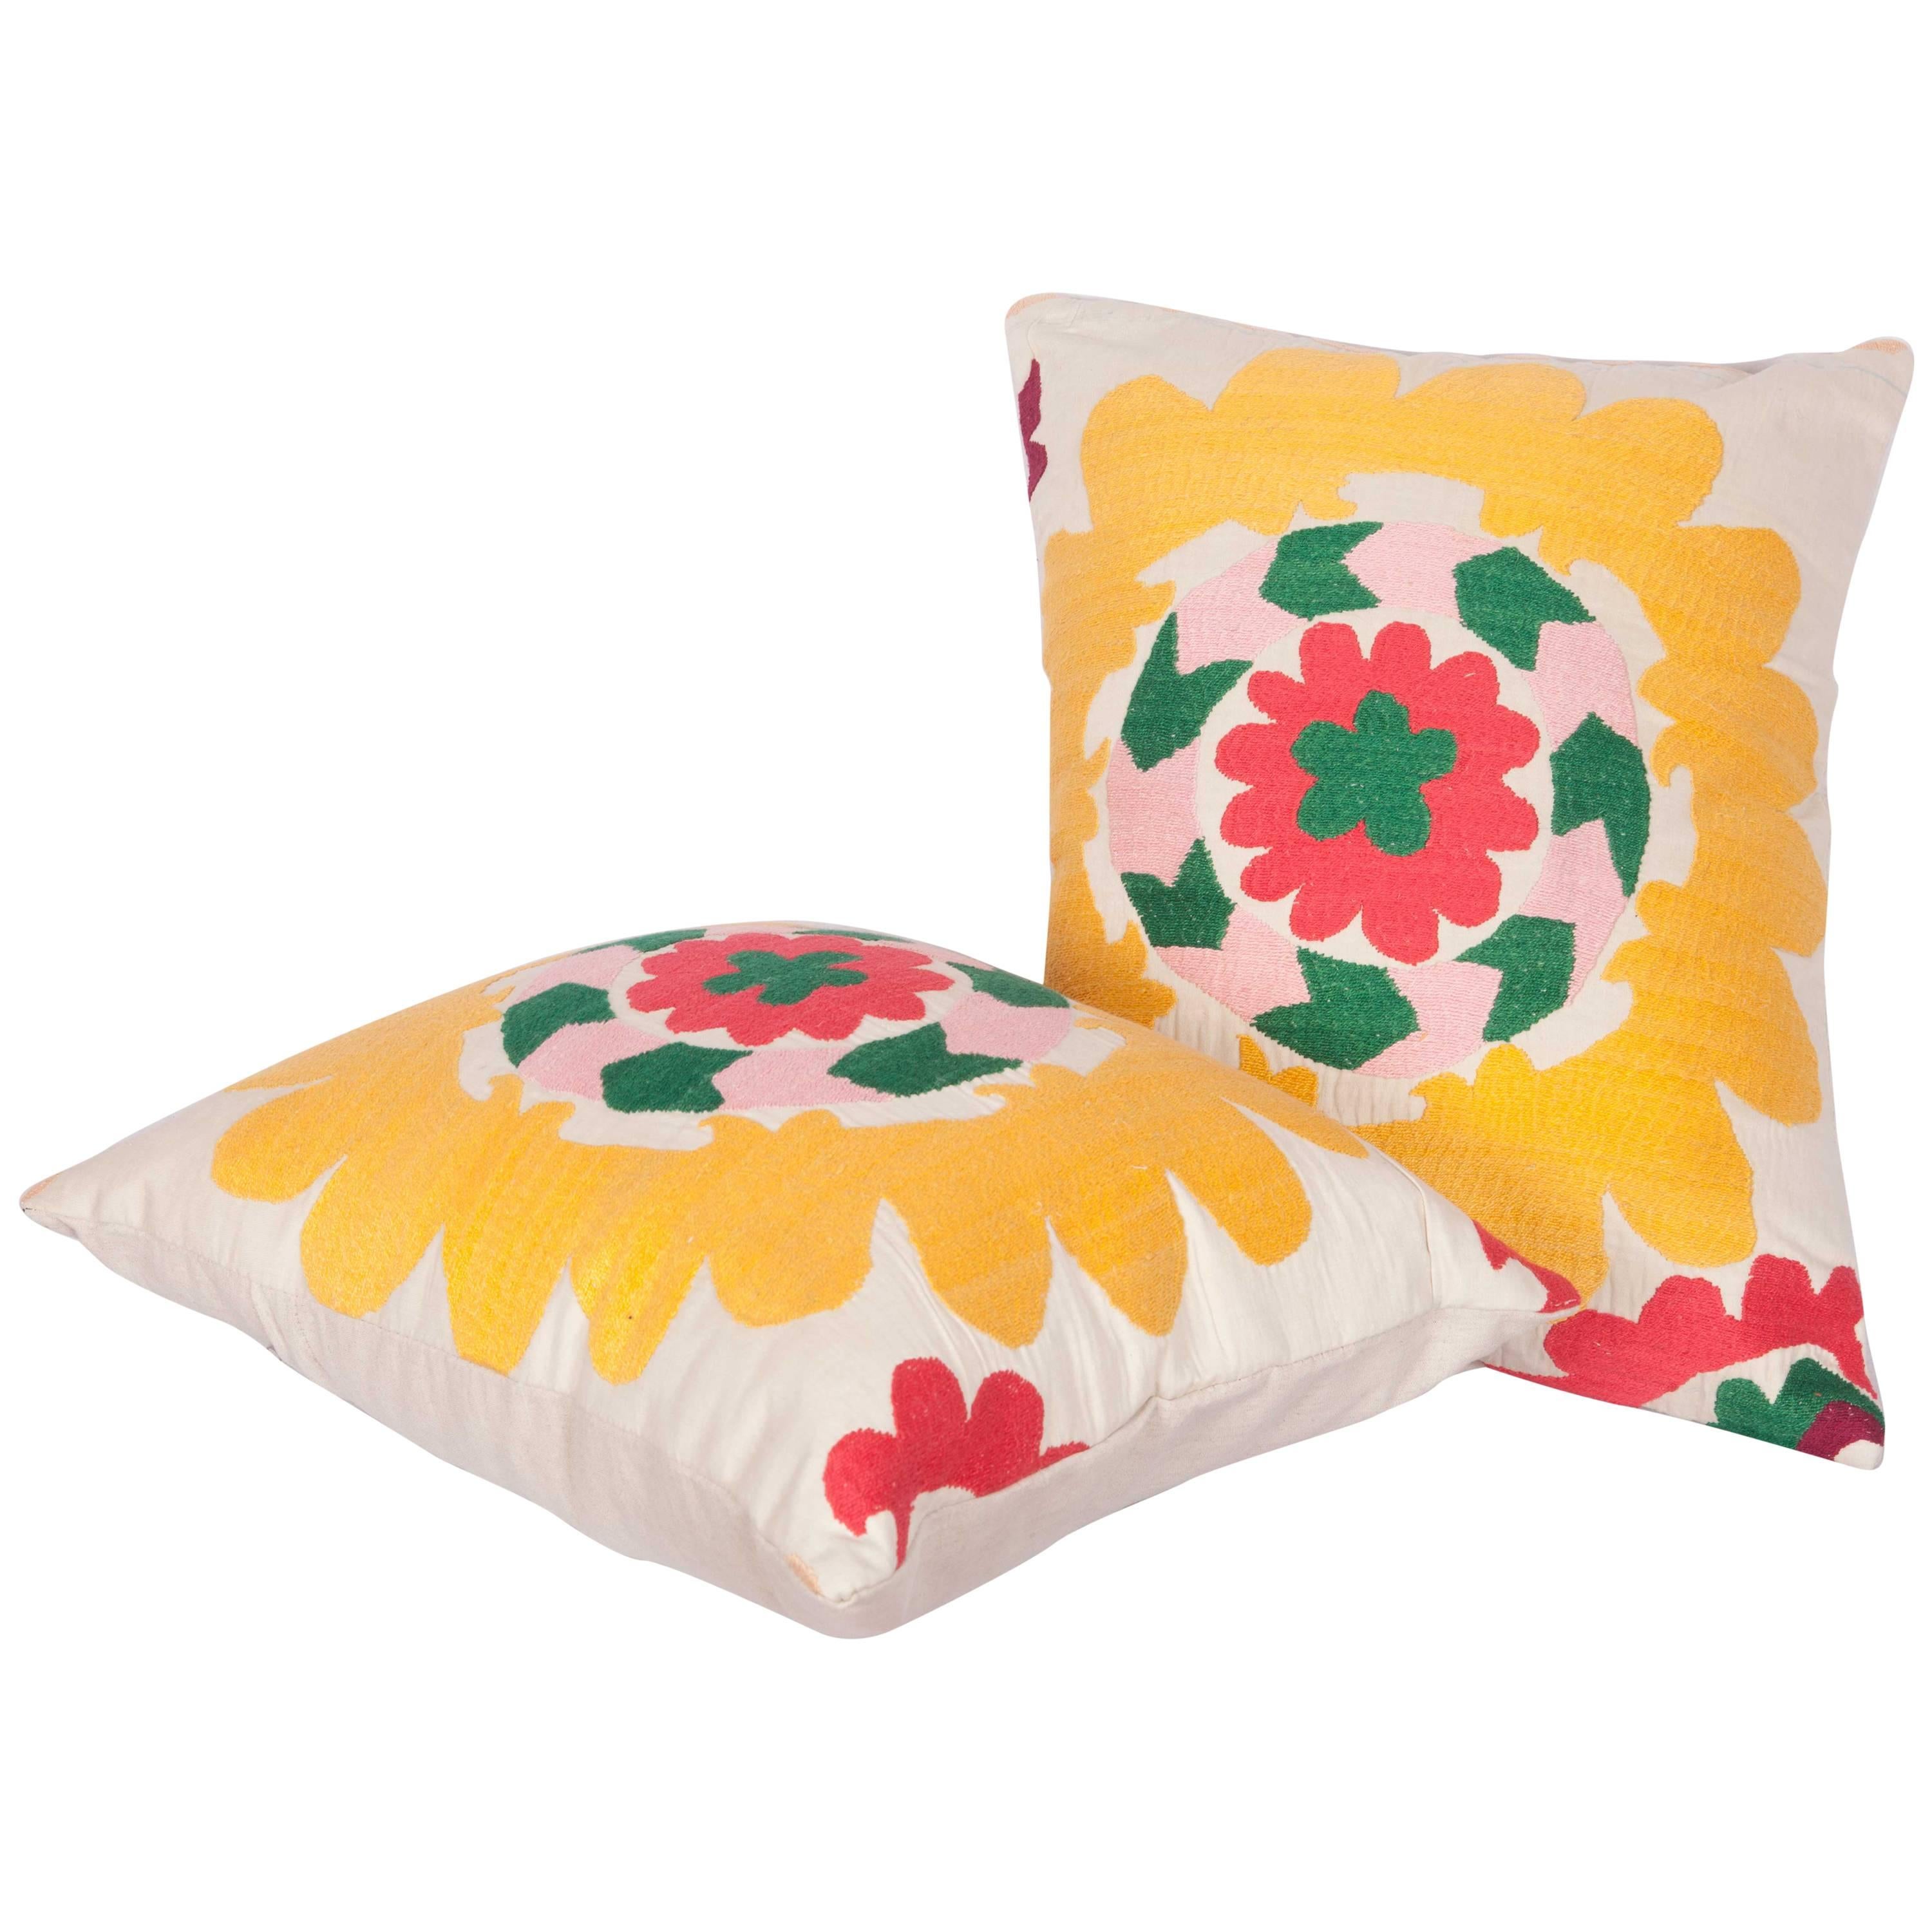 Pillow Cases Fashioned Out of a Vintage Tajik Suzani